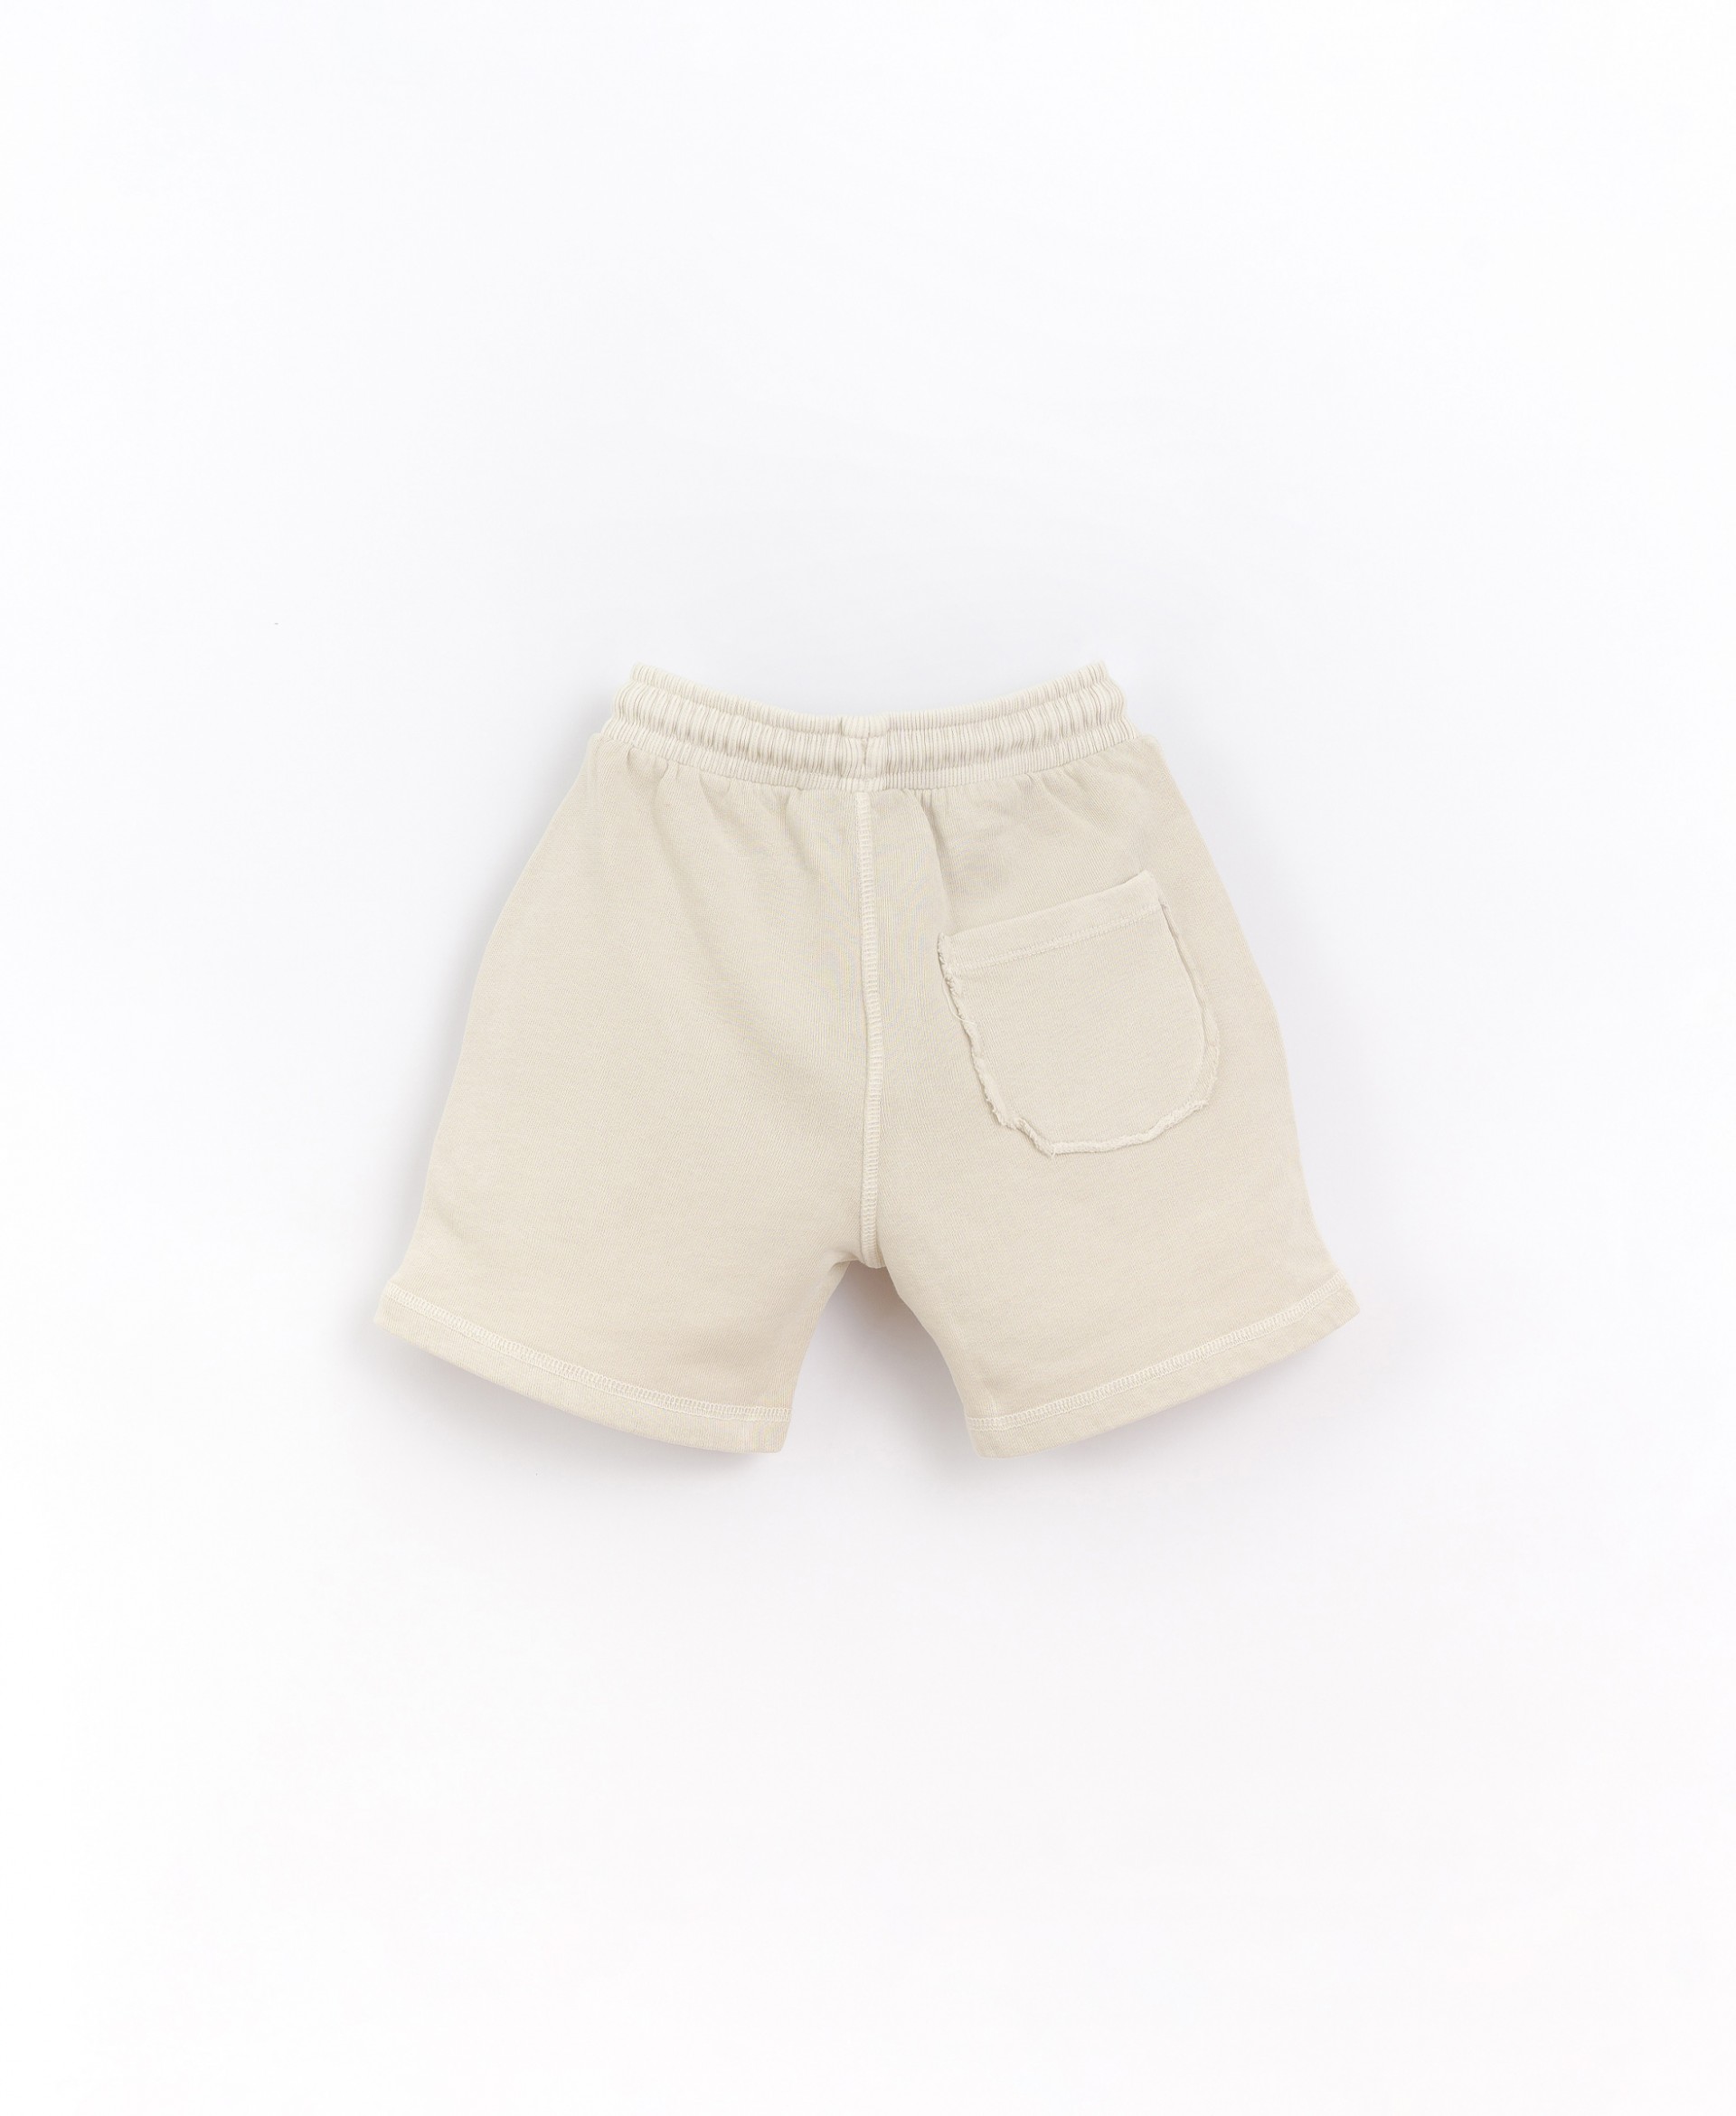 Shorts in jersey of natural fibers | Basketry